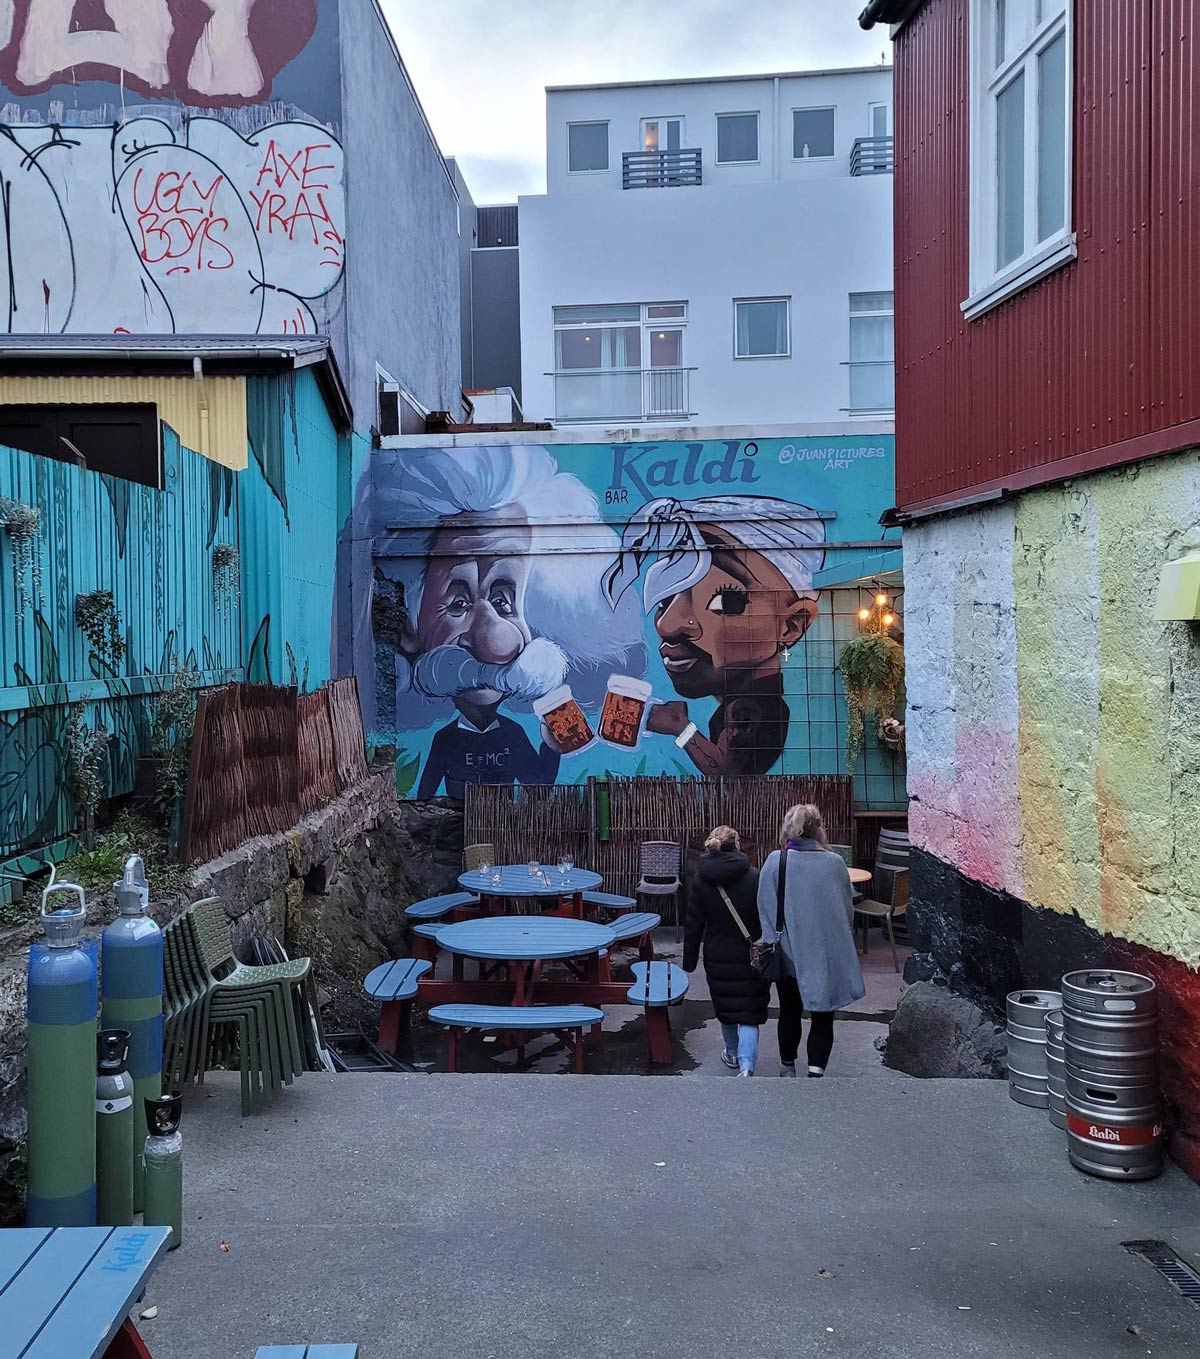 Tupac & Einstein having a beer together at this restaurant in Iceland